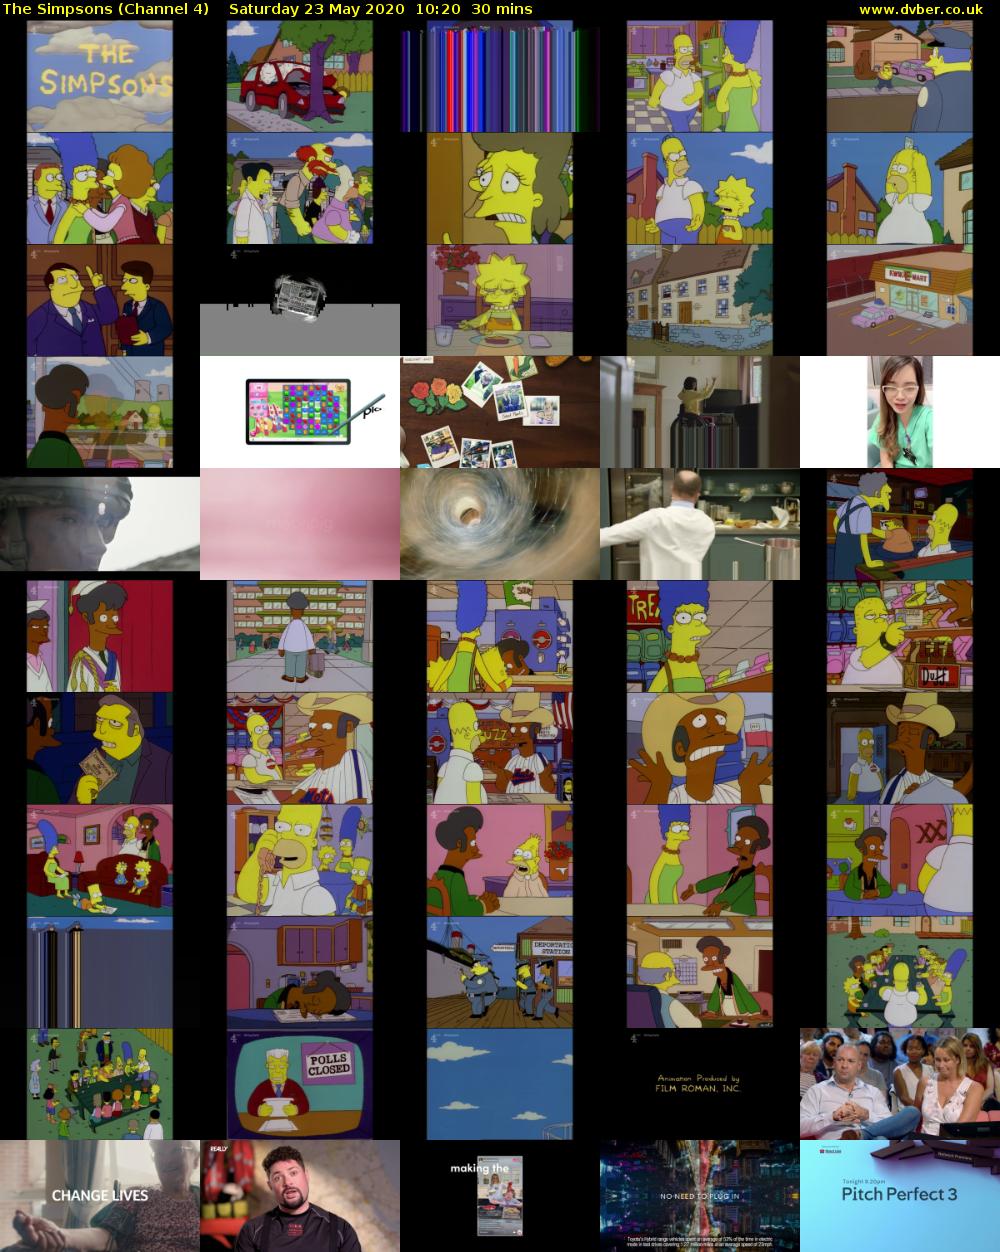 The Simpsons (Channel 4) Saturday 23 May 2020 10:20 - 10:50